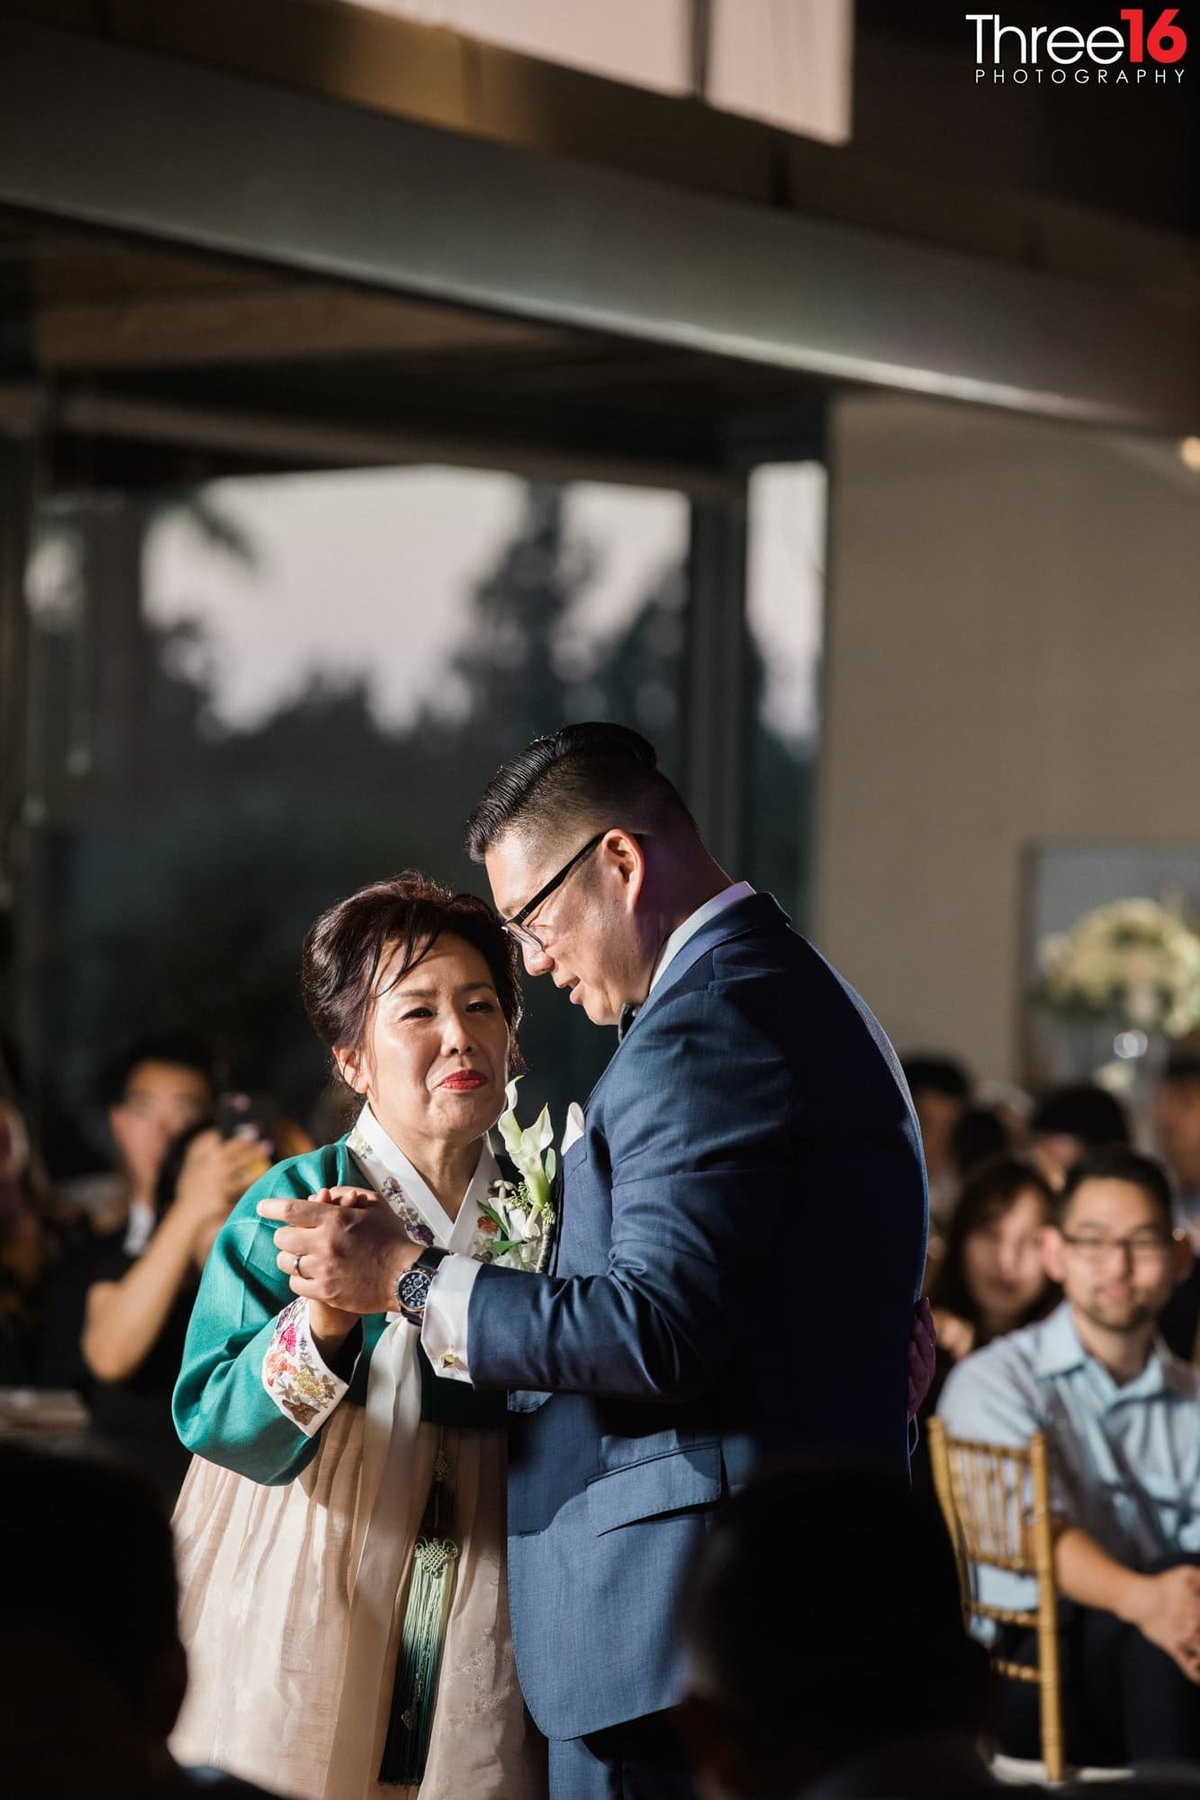 Groom dances with his mother at his wedding